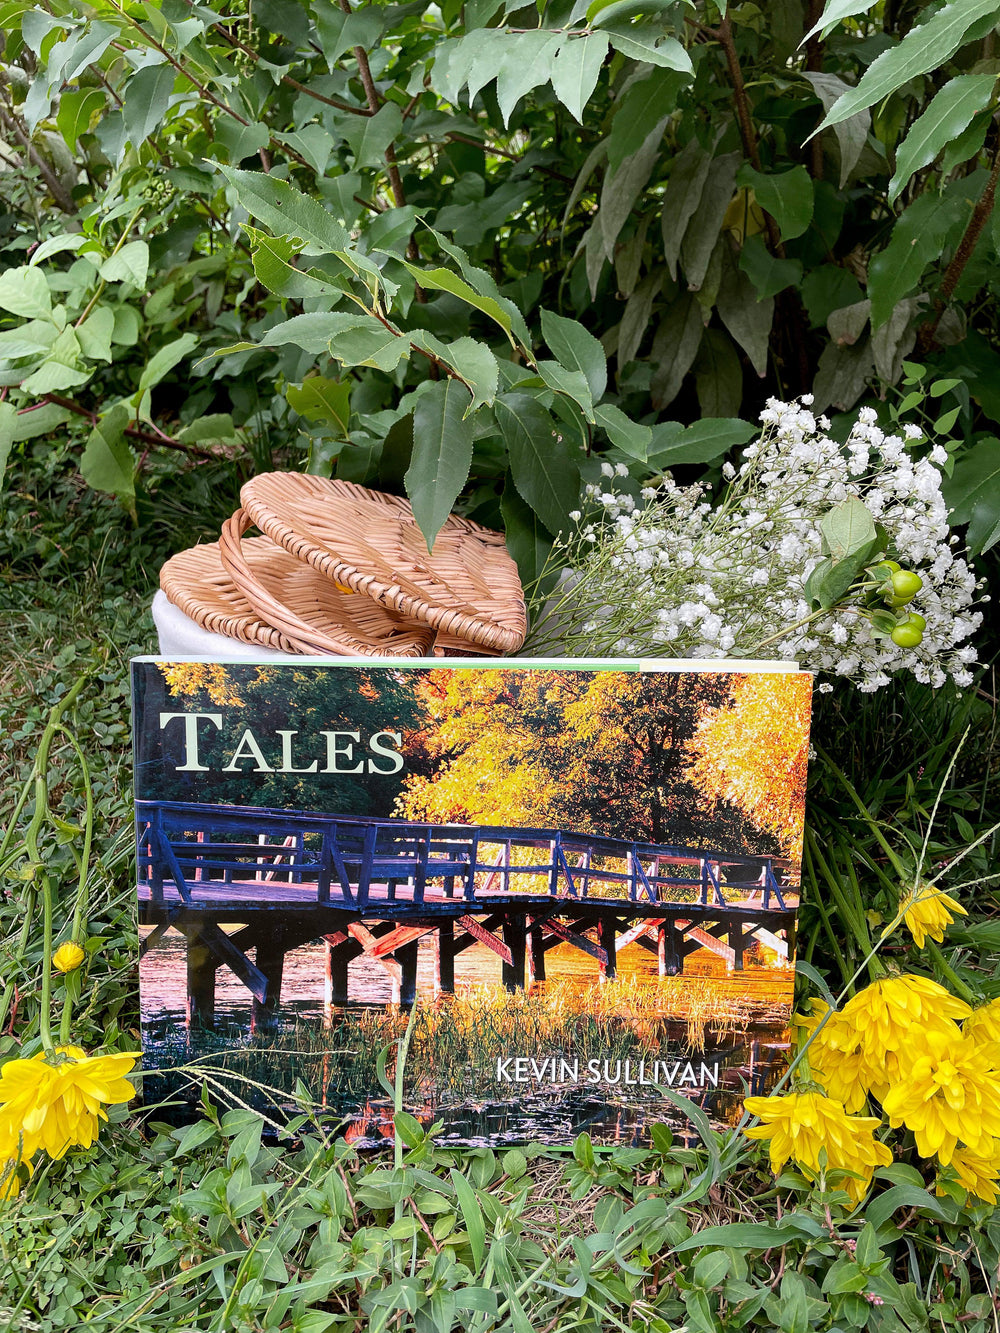 "Tales" Hardcover Coffee Table Book by Kevin Sullivan